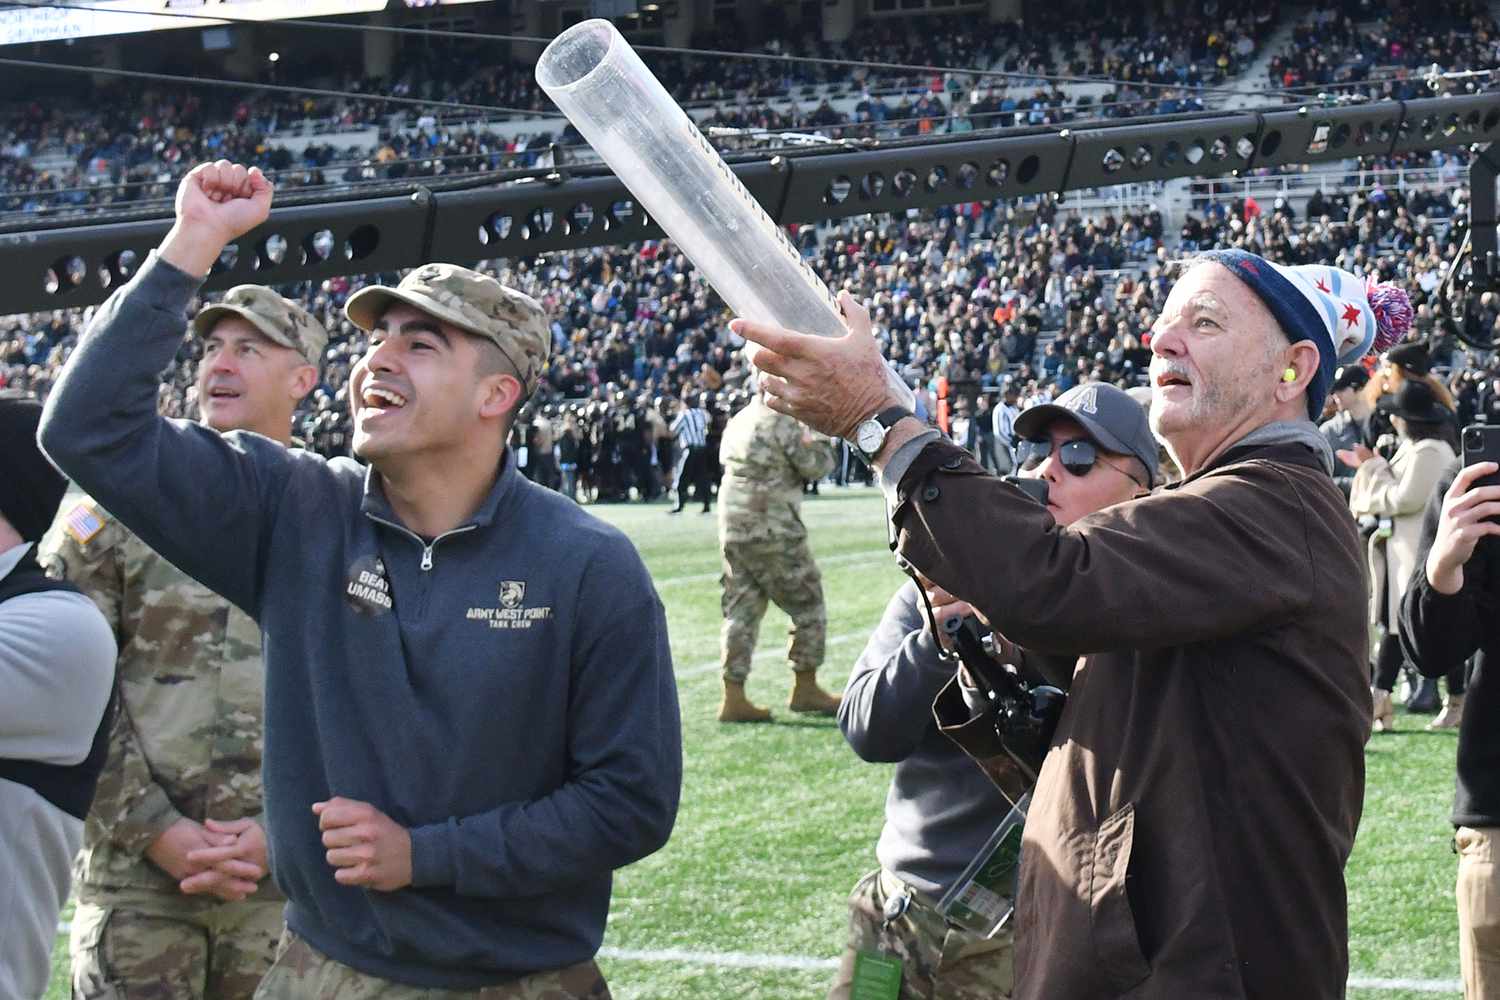 Bill Murray attends Army Black Knights vs UMass football Game at Michie Stadium on November 20, 2021 in West Point, New York